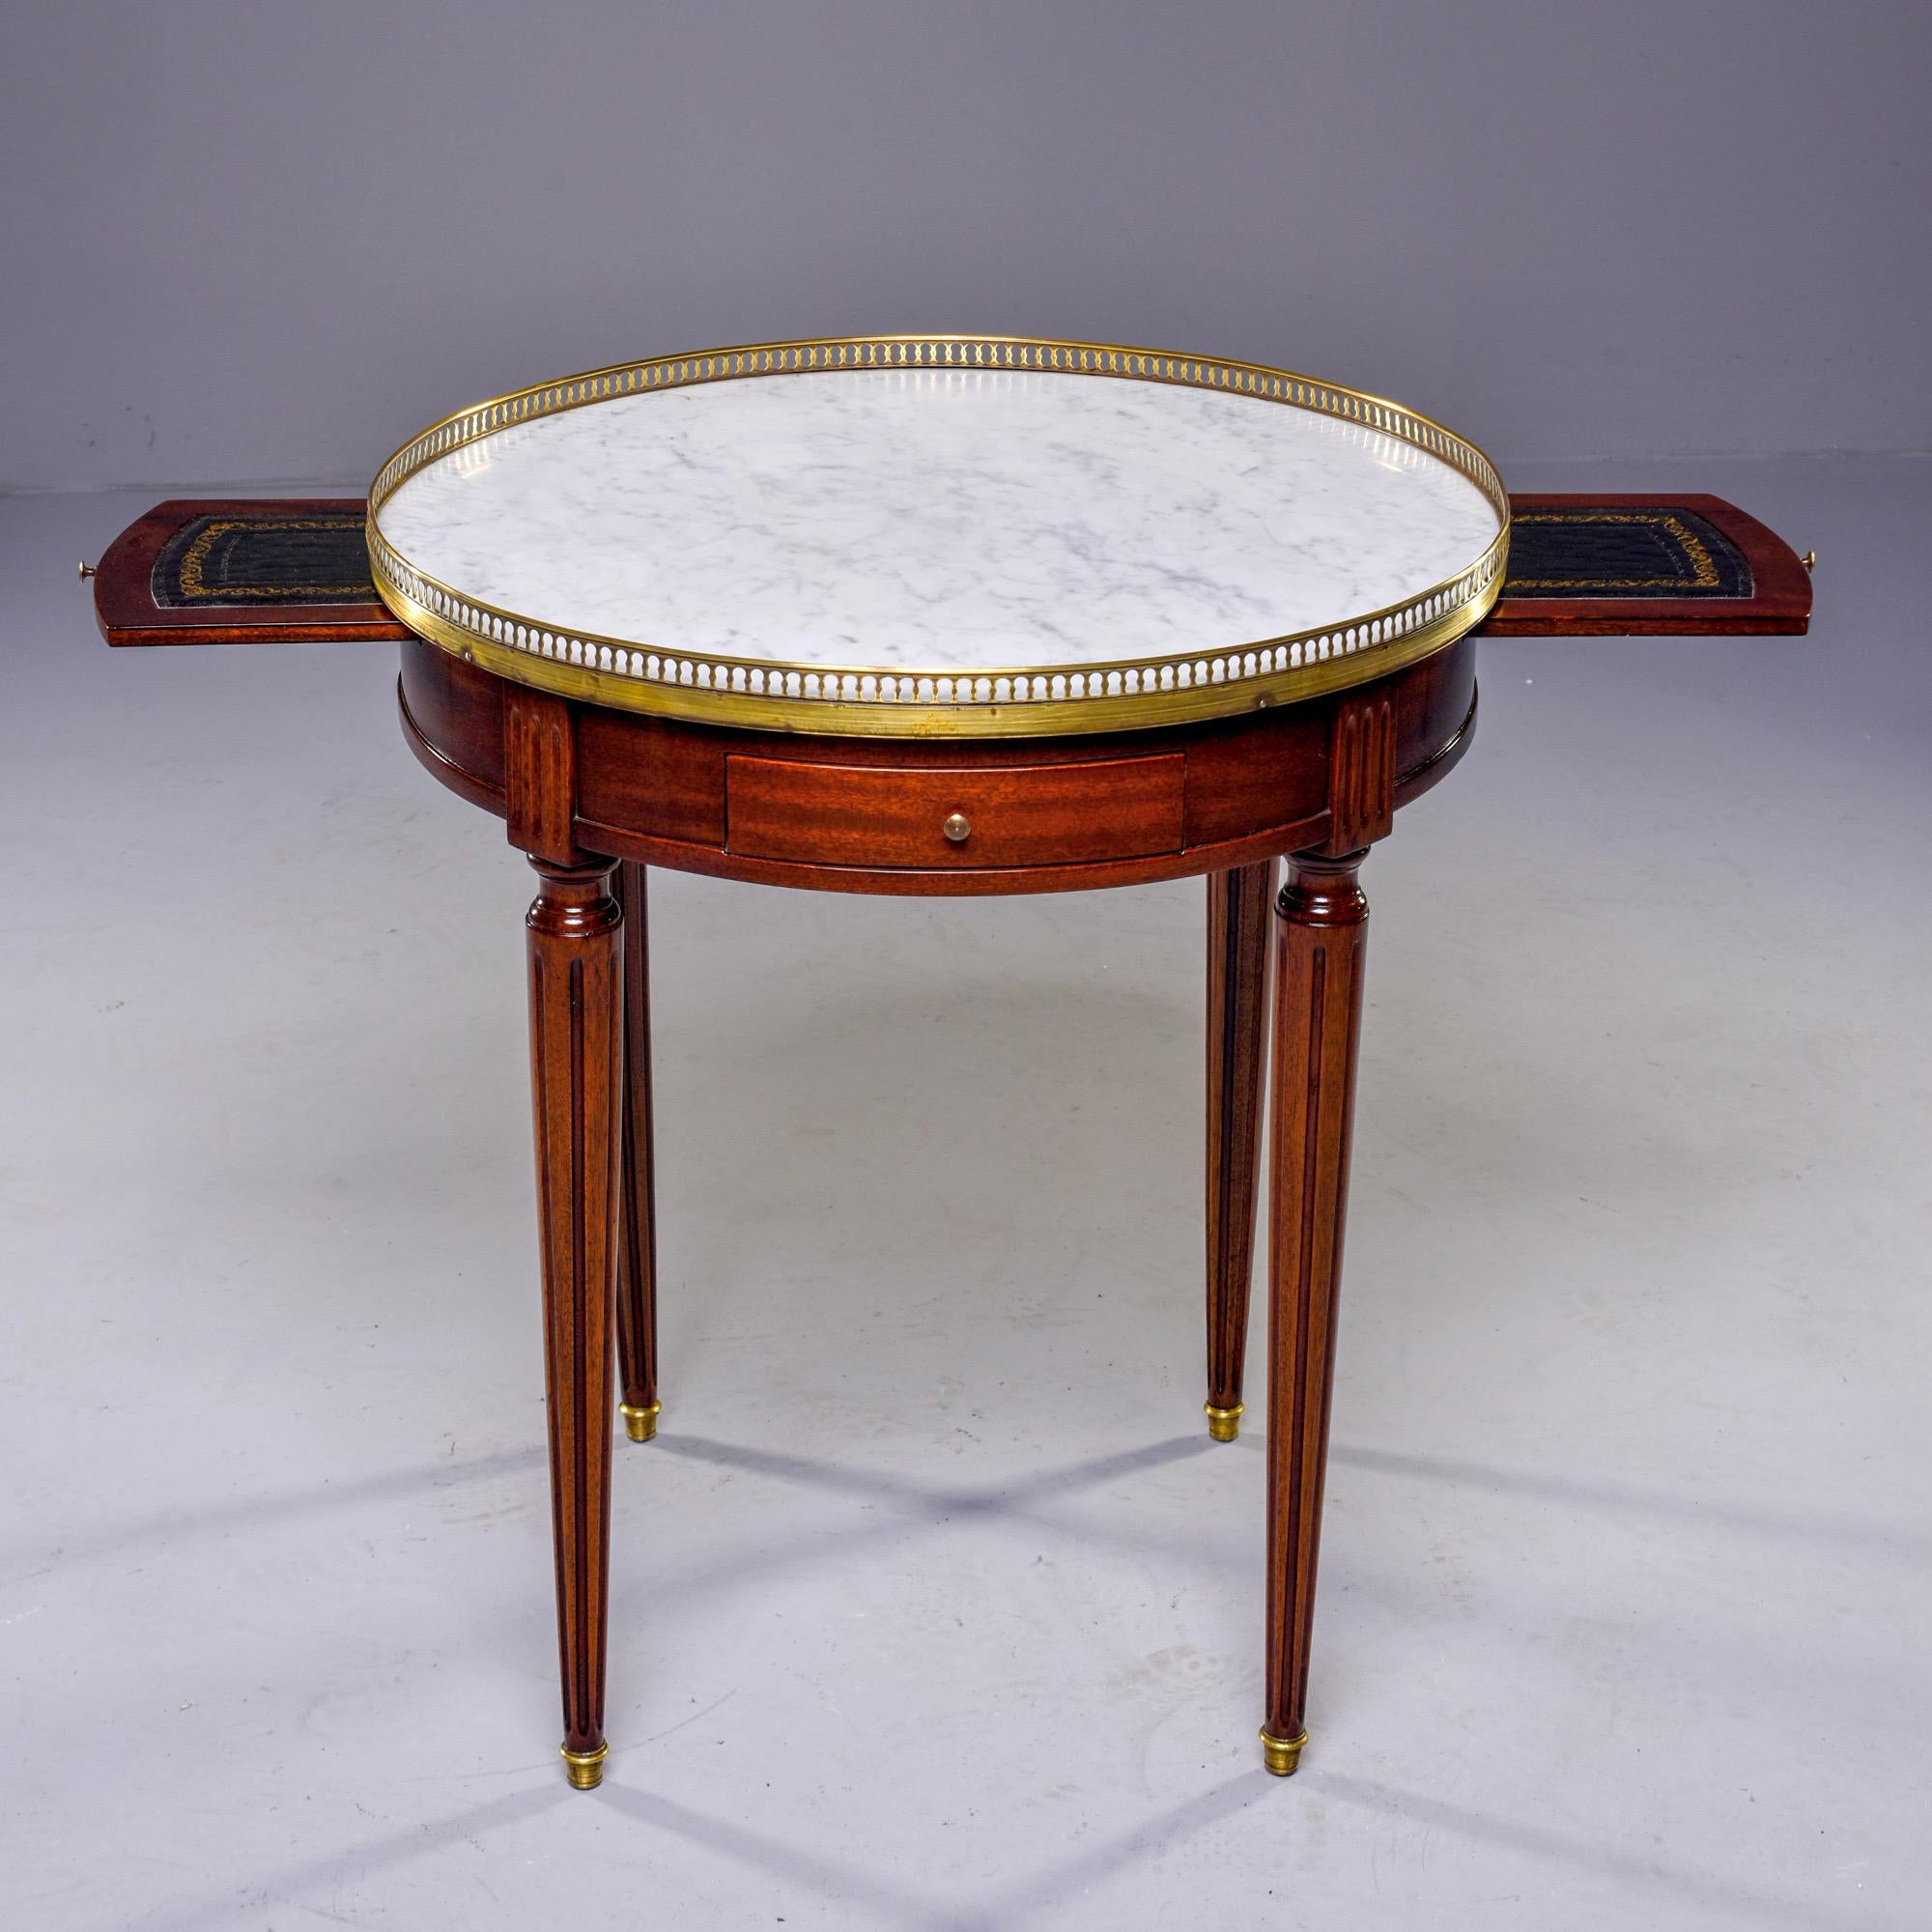 20th Century Louis XVI Style Brass Bound Table with White Marble Top